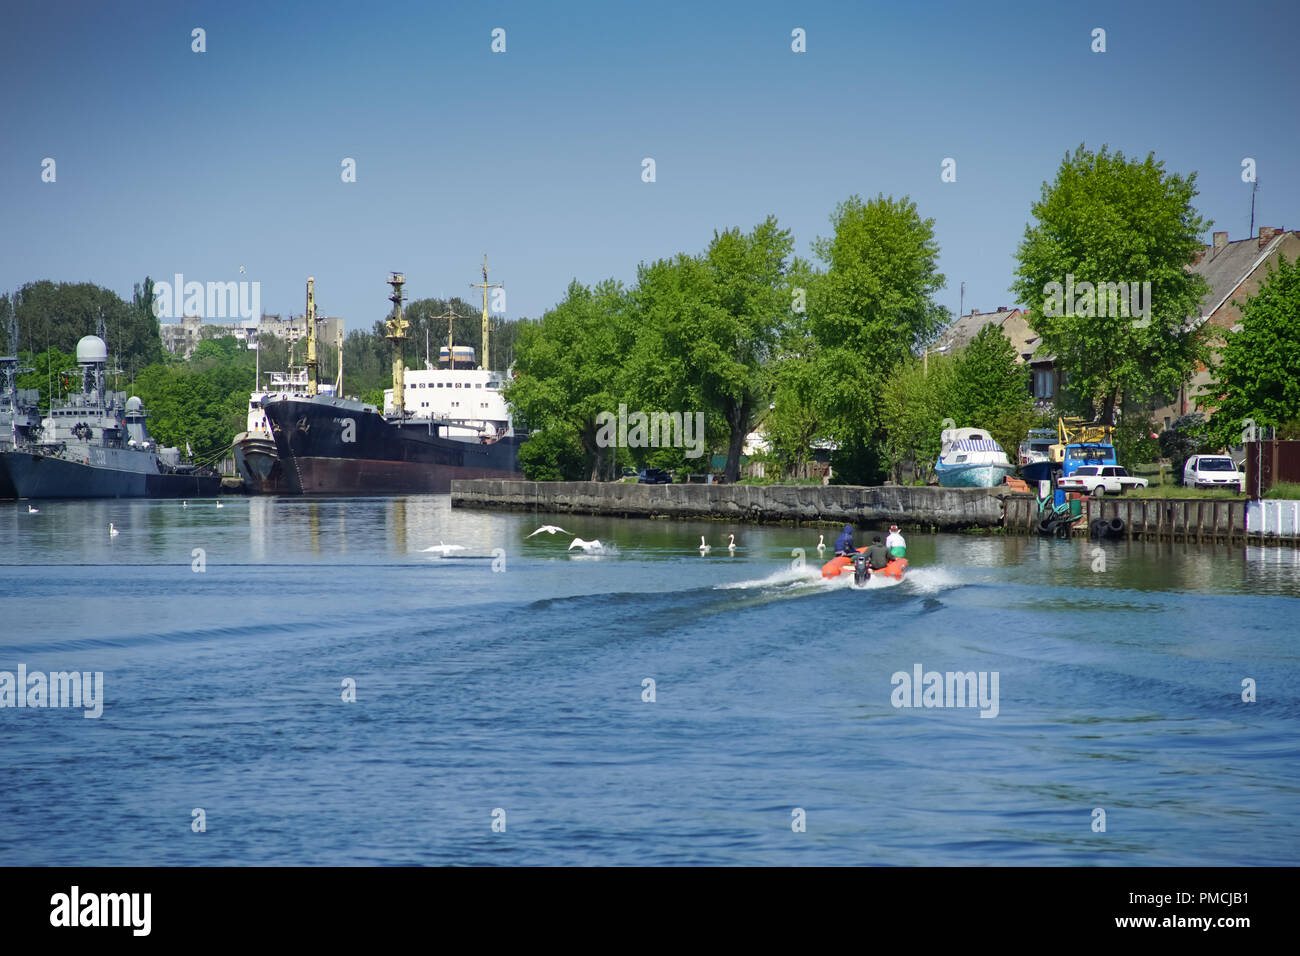 Baltiysk, Russia - may 19, 2016: Urban landscape with a seaport and ships at the pier. Stock Photo